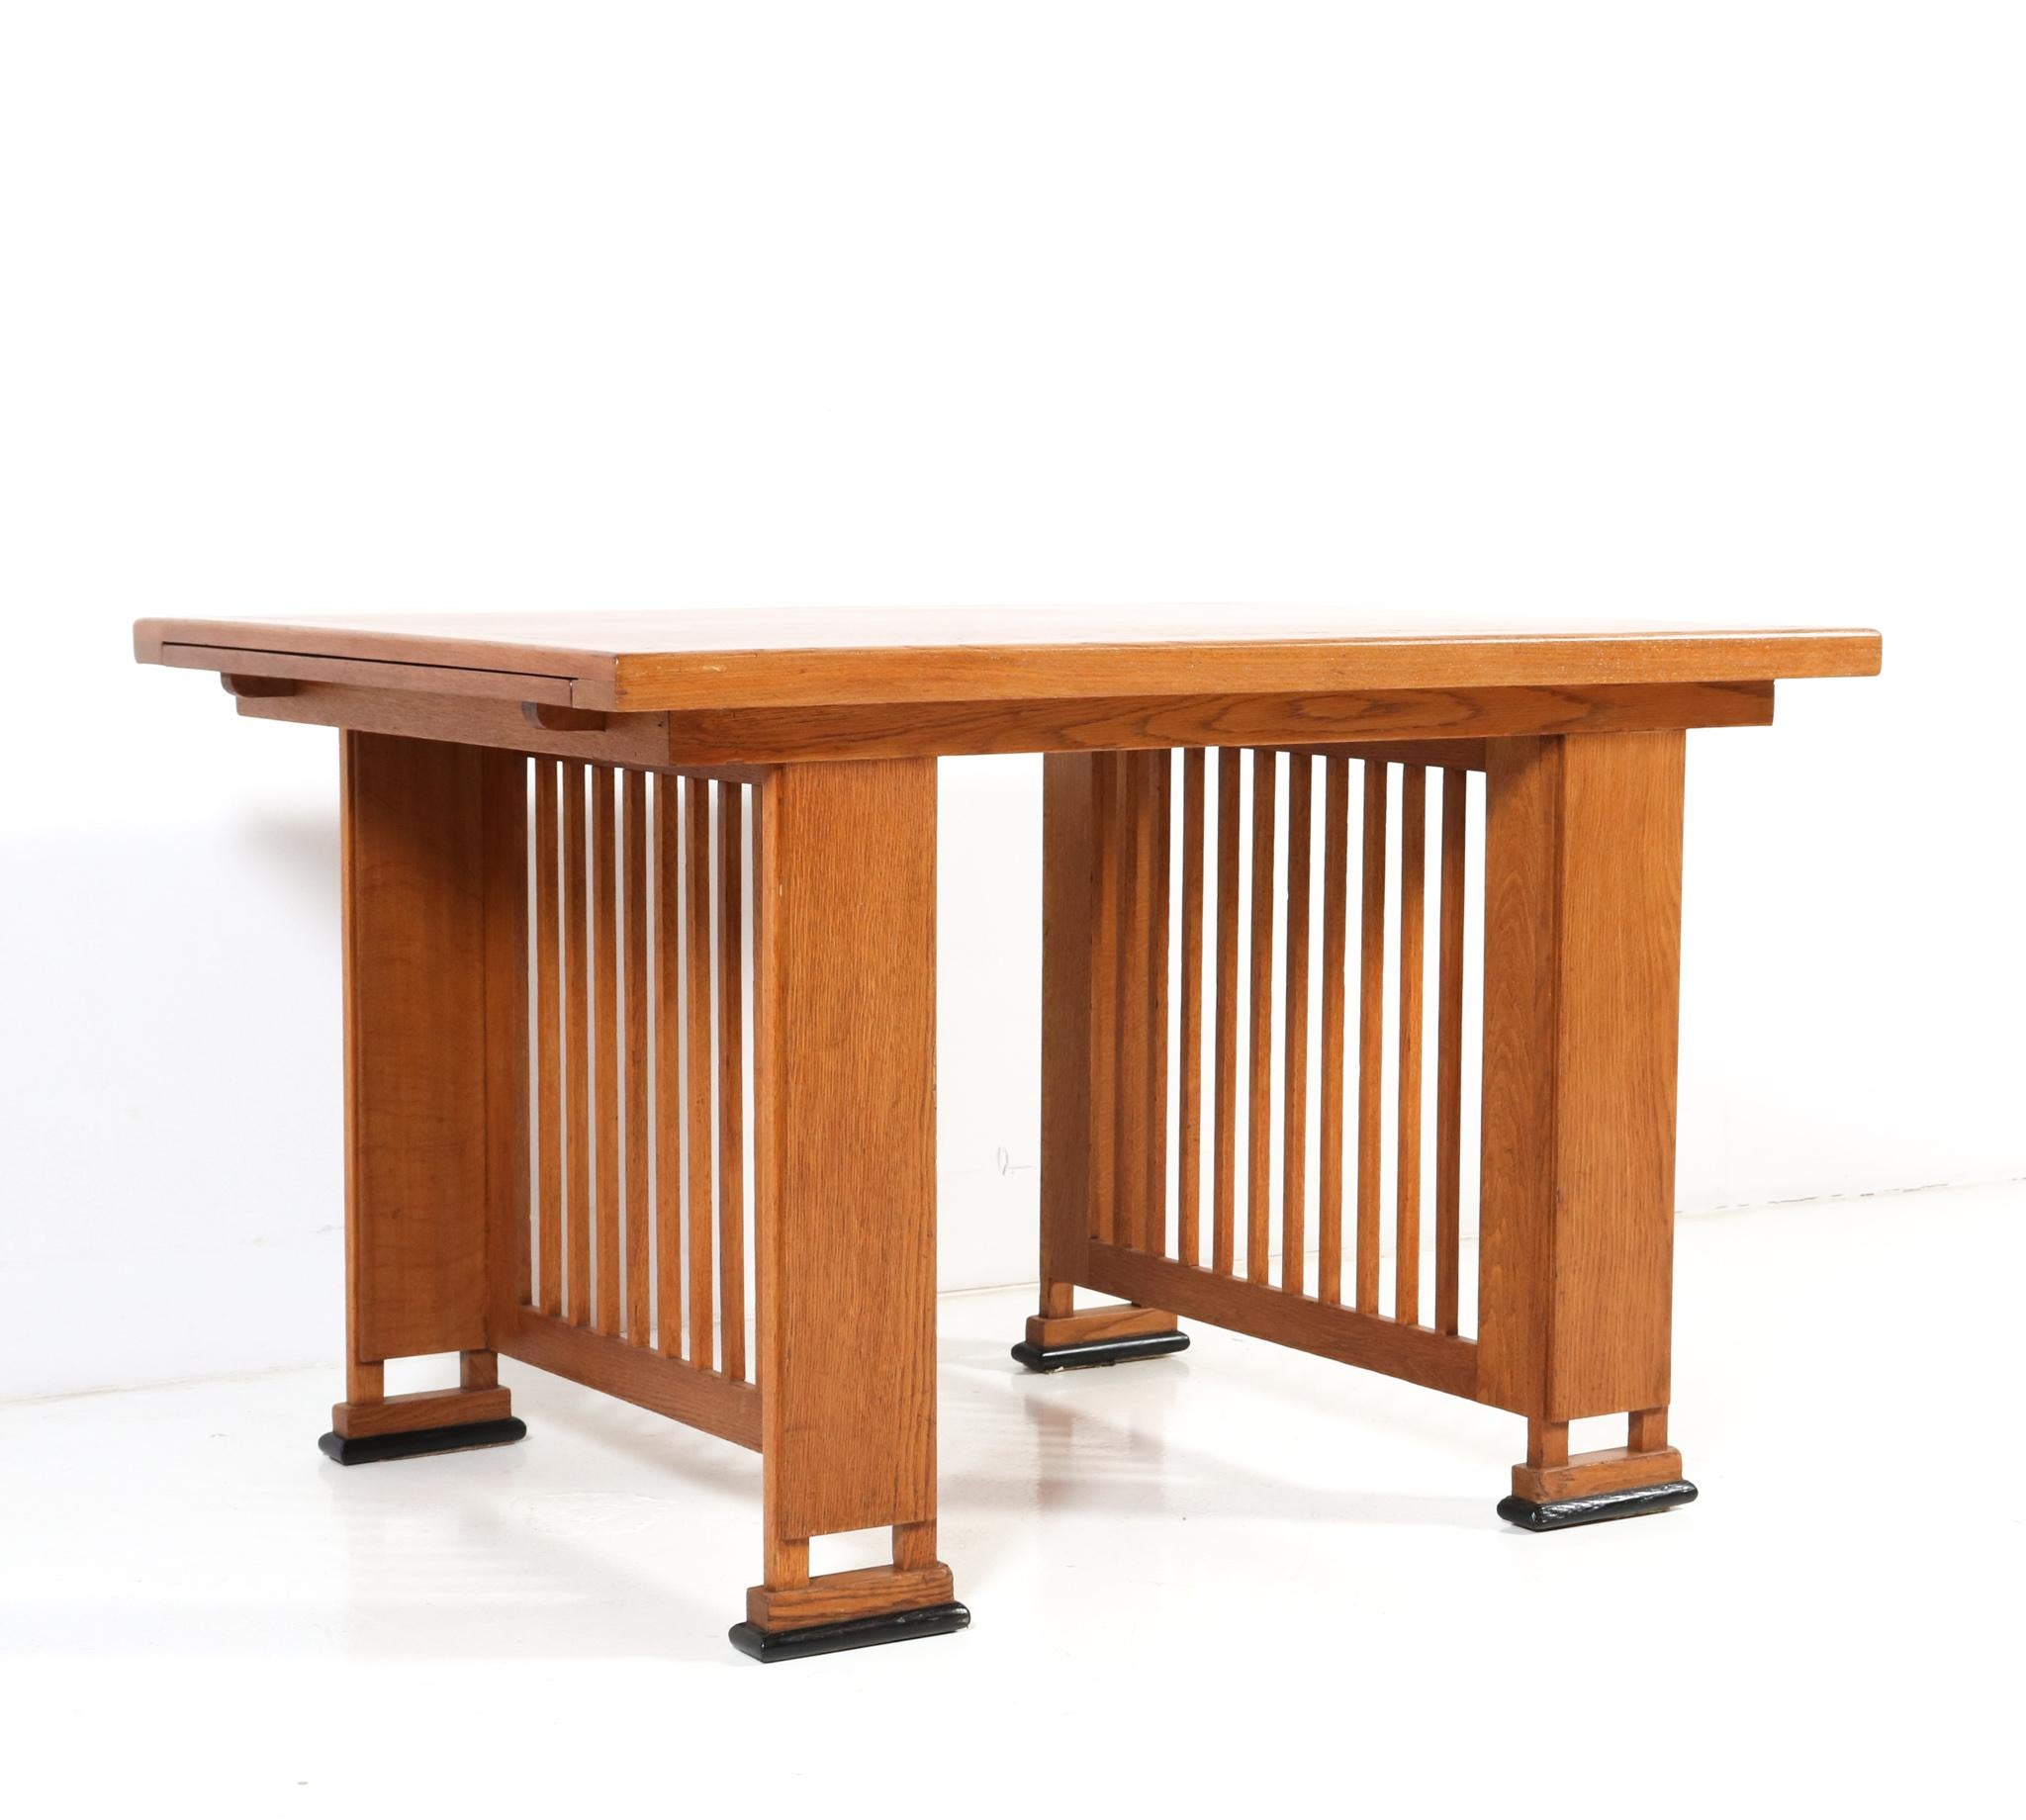 Dutch Oak Art Deco Modernist Writing Table or Dining Table by Architect Caspers, 1920s For Sale